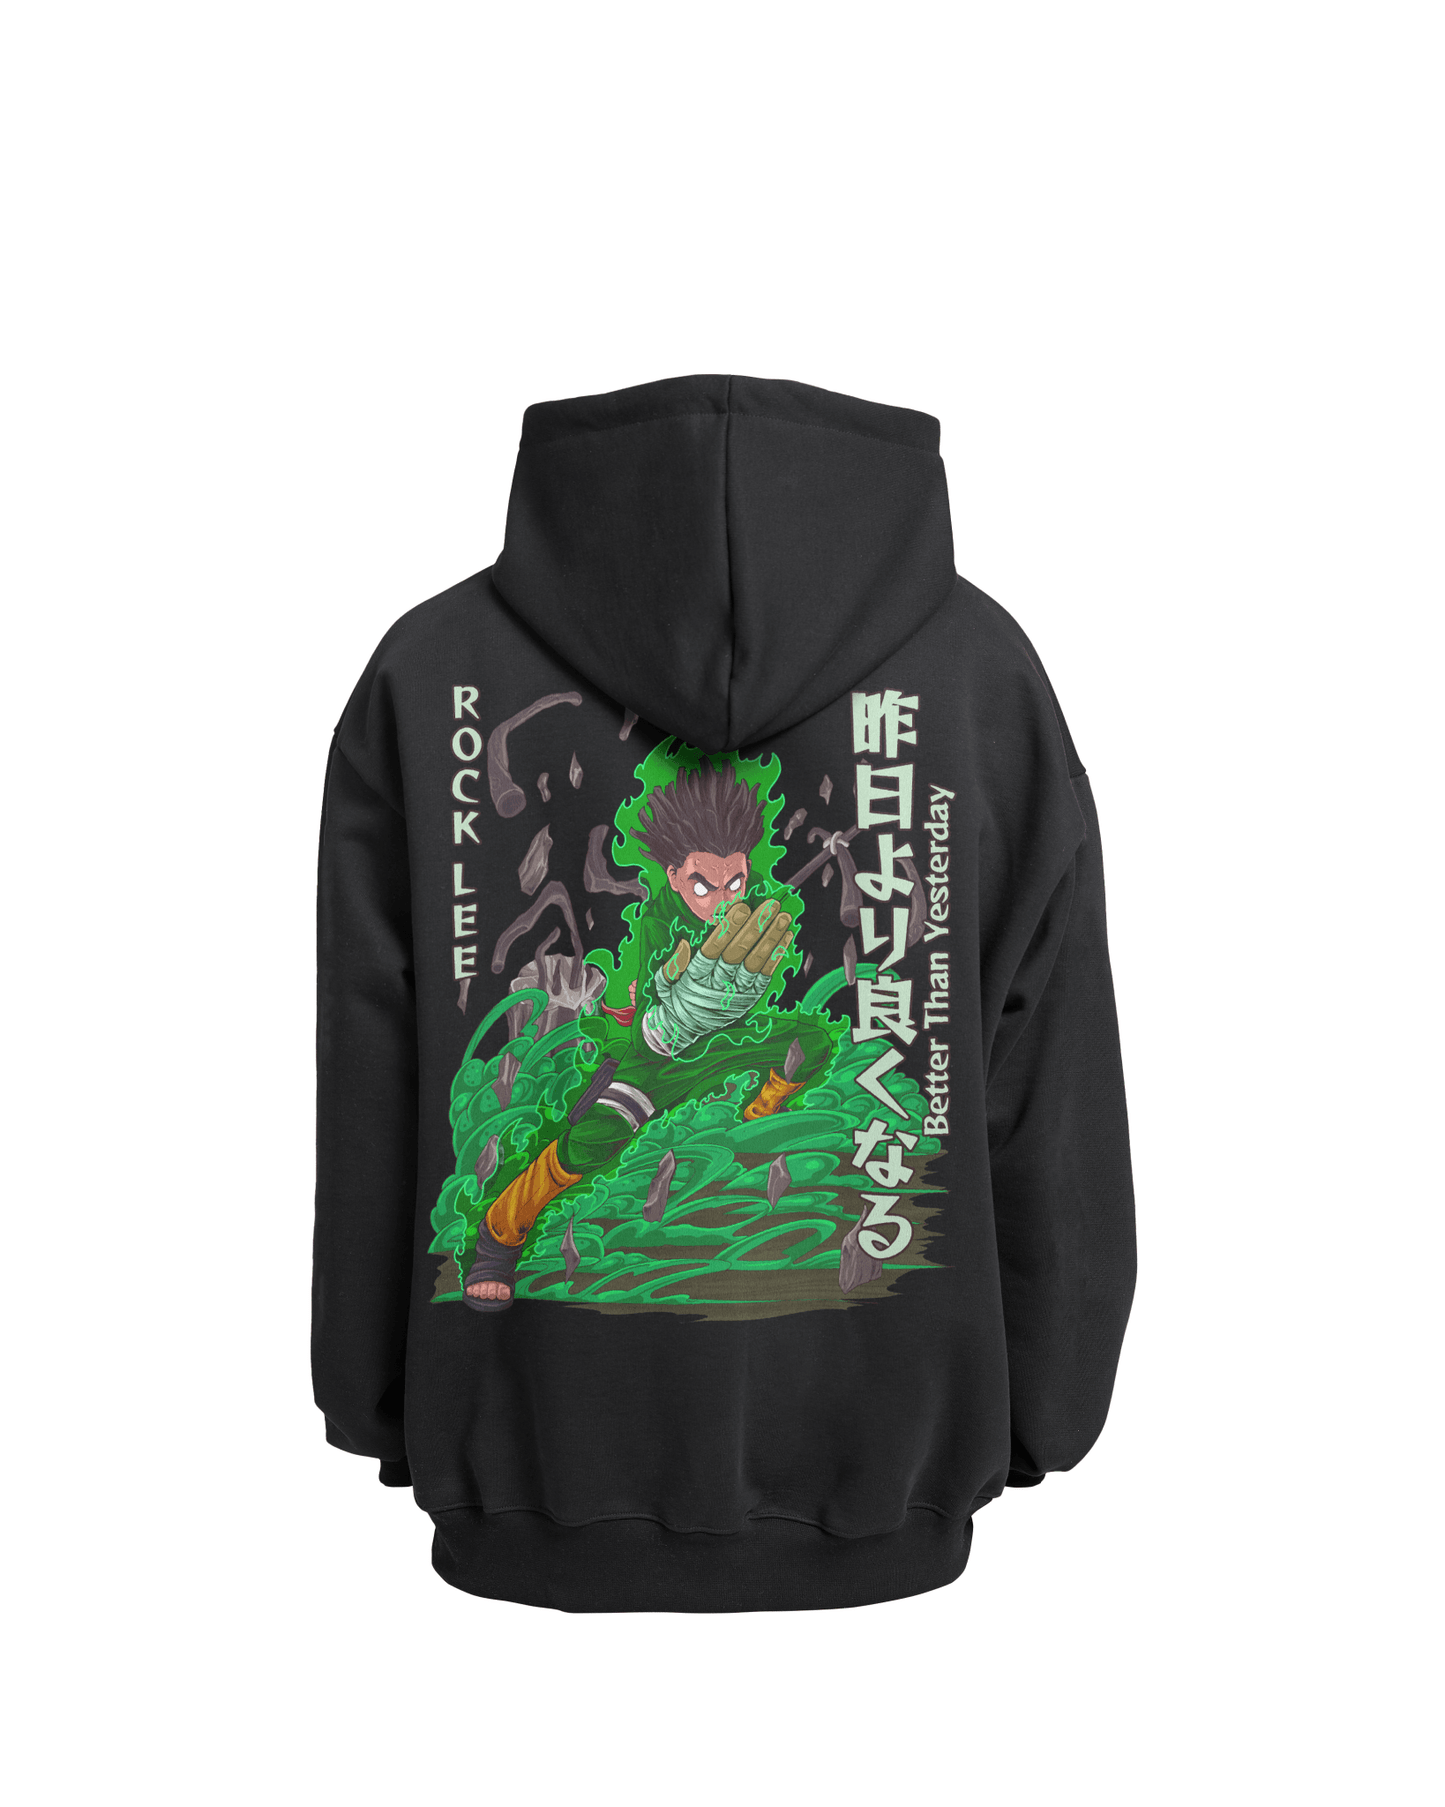 "ROCK LEE x BETTER THAN YESTERDAY" - Oversized Hoodie !SALE!